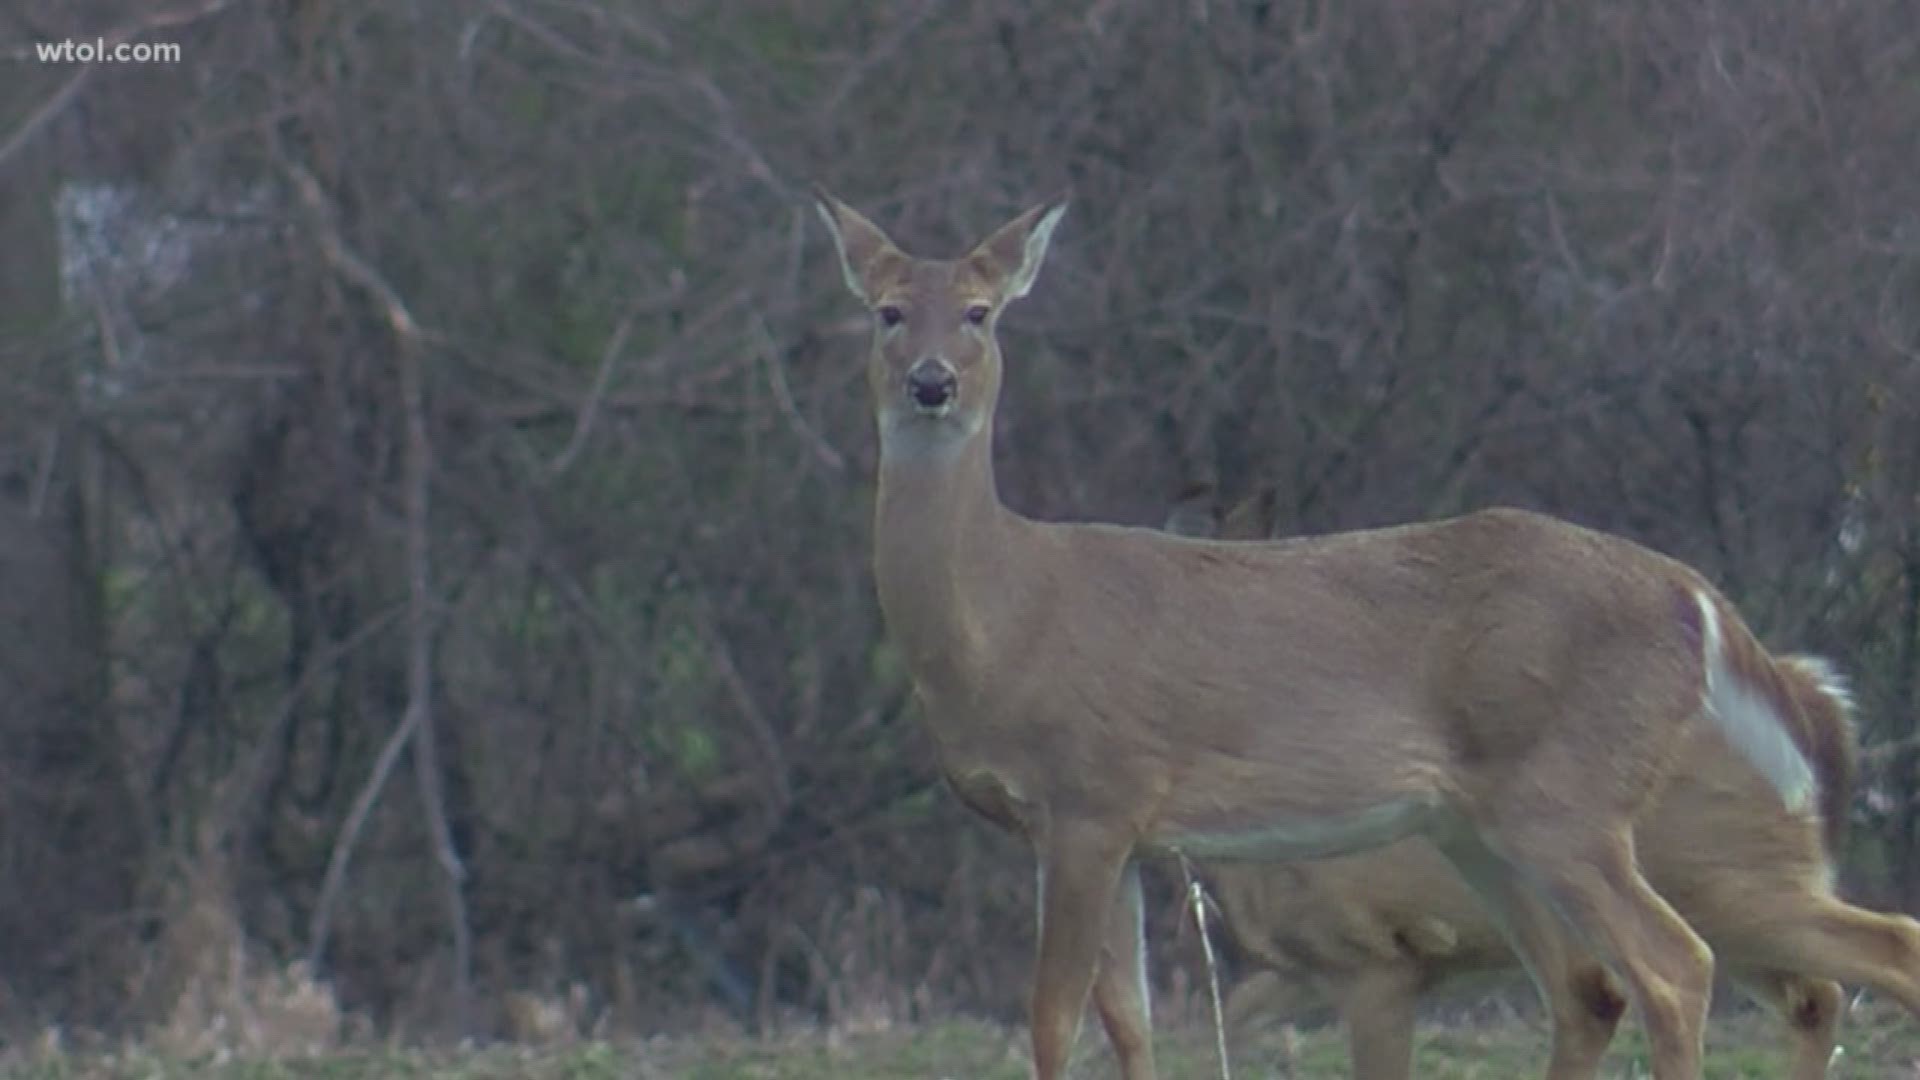 Because right now, we need it: The sights and sounds of nature and deer in the South End of Toledo, captured by WTOL 11 photojournalist Joe Cromer.